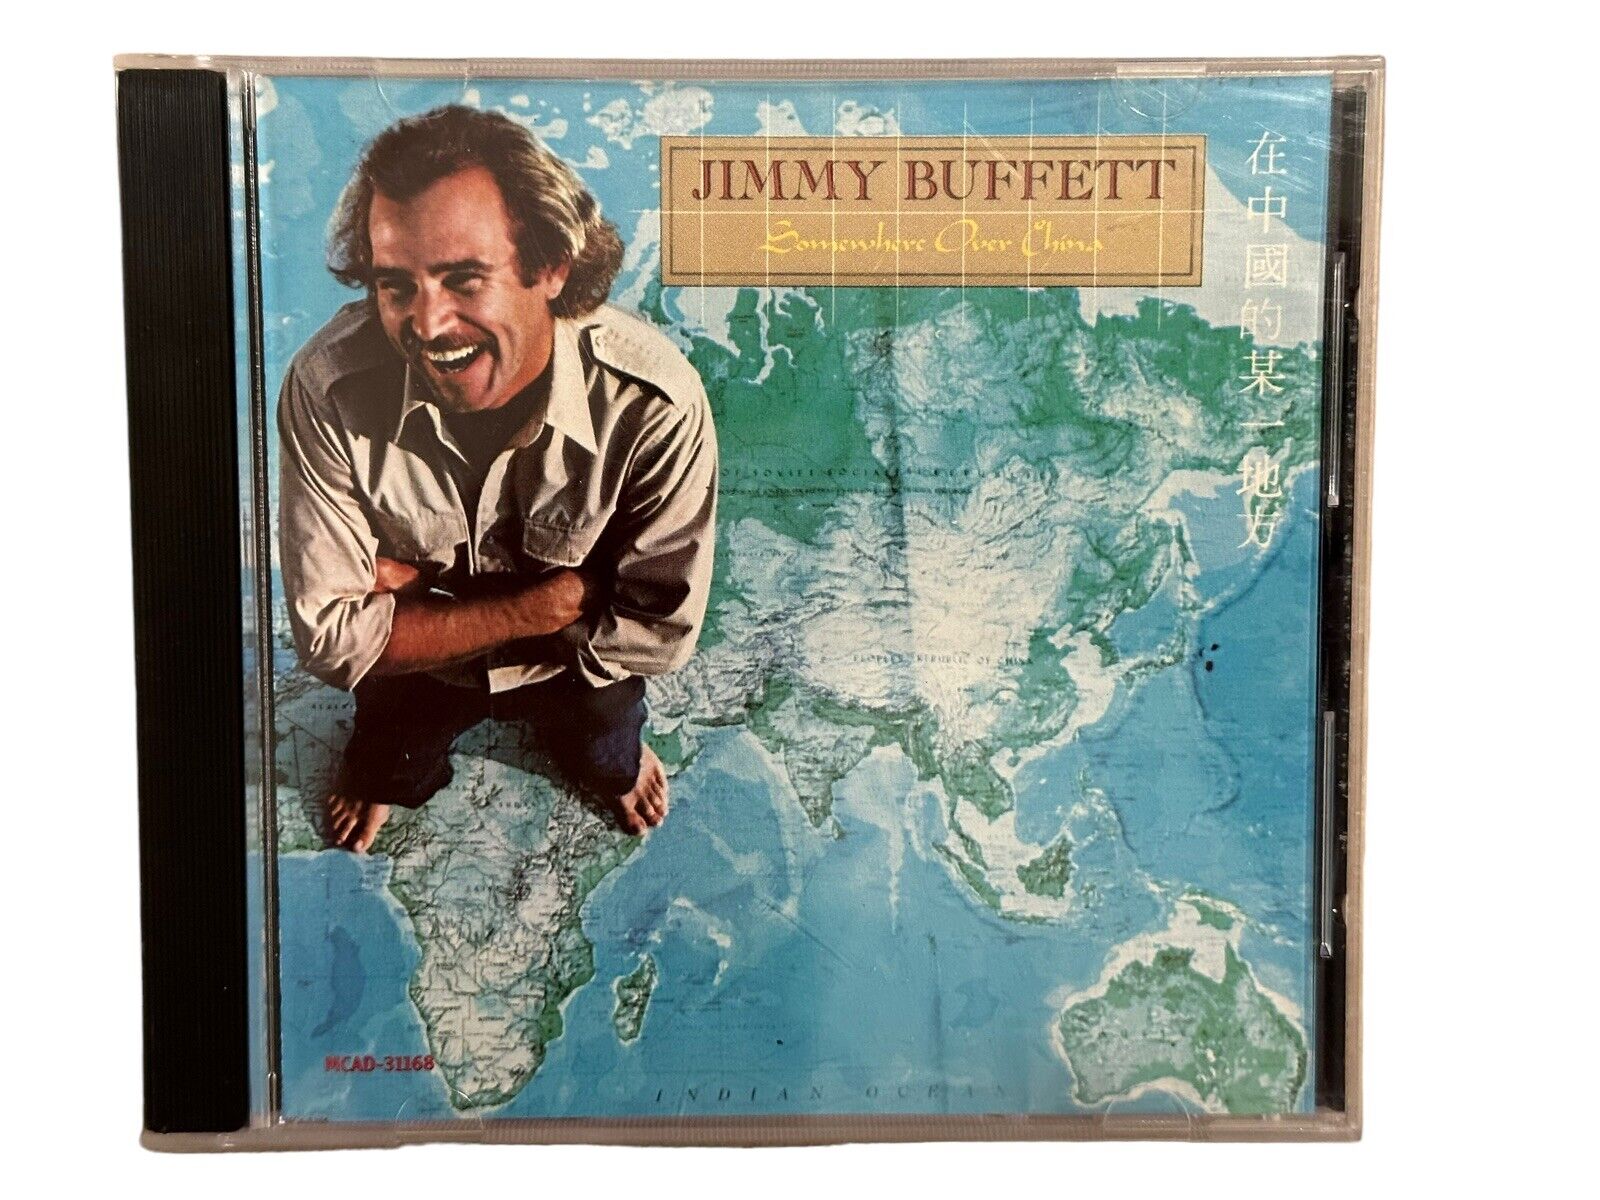 Jimmy Buffett : Somewhere Over China CD (1981) MINT Condition 1st Edition